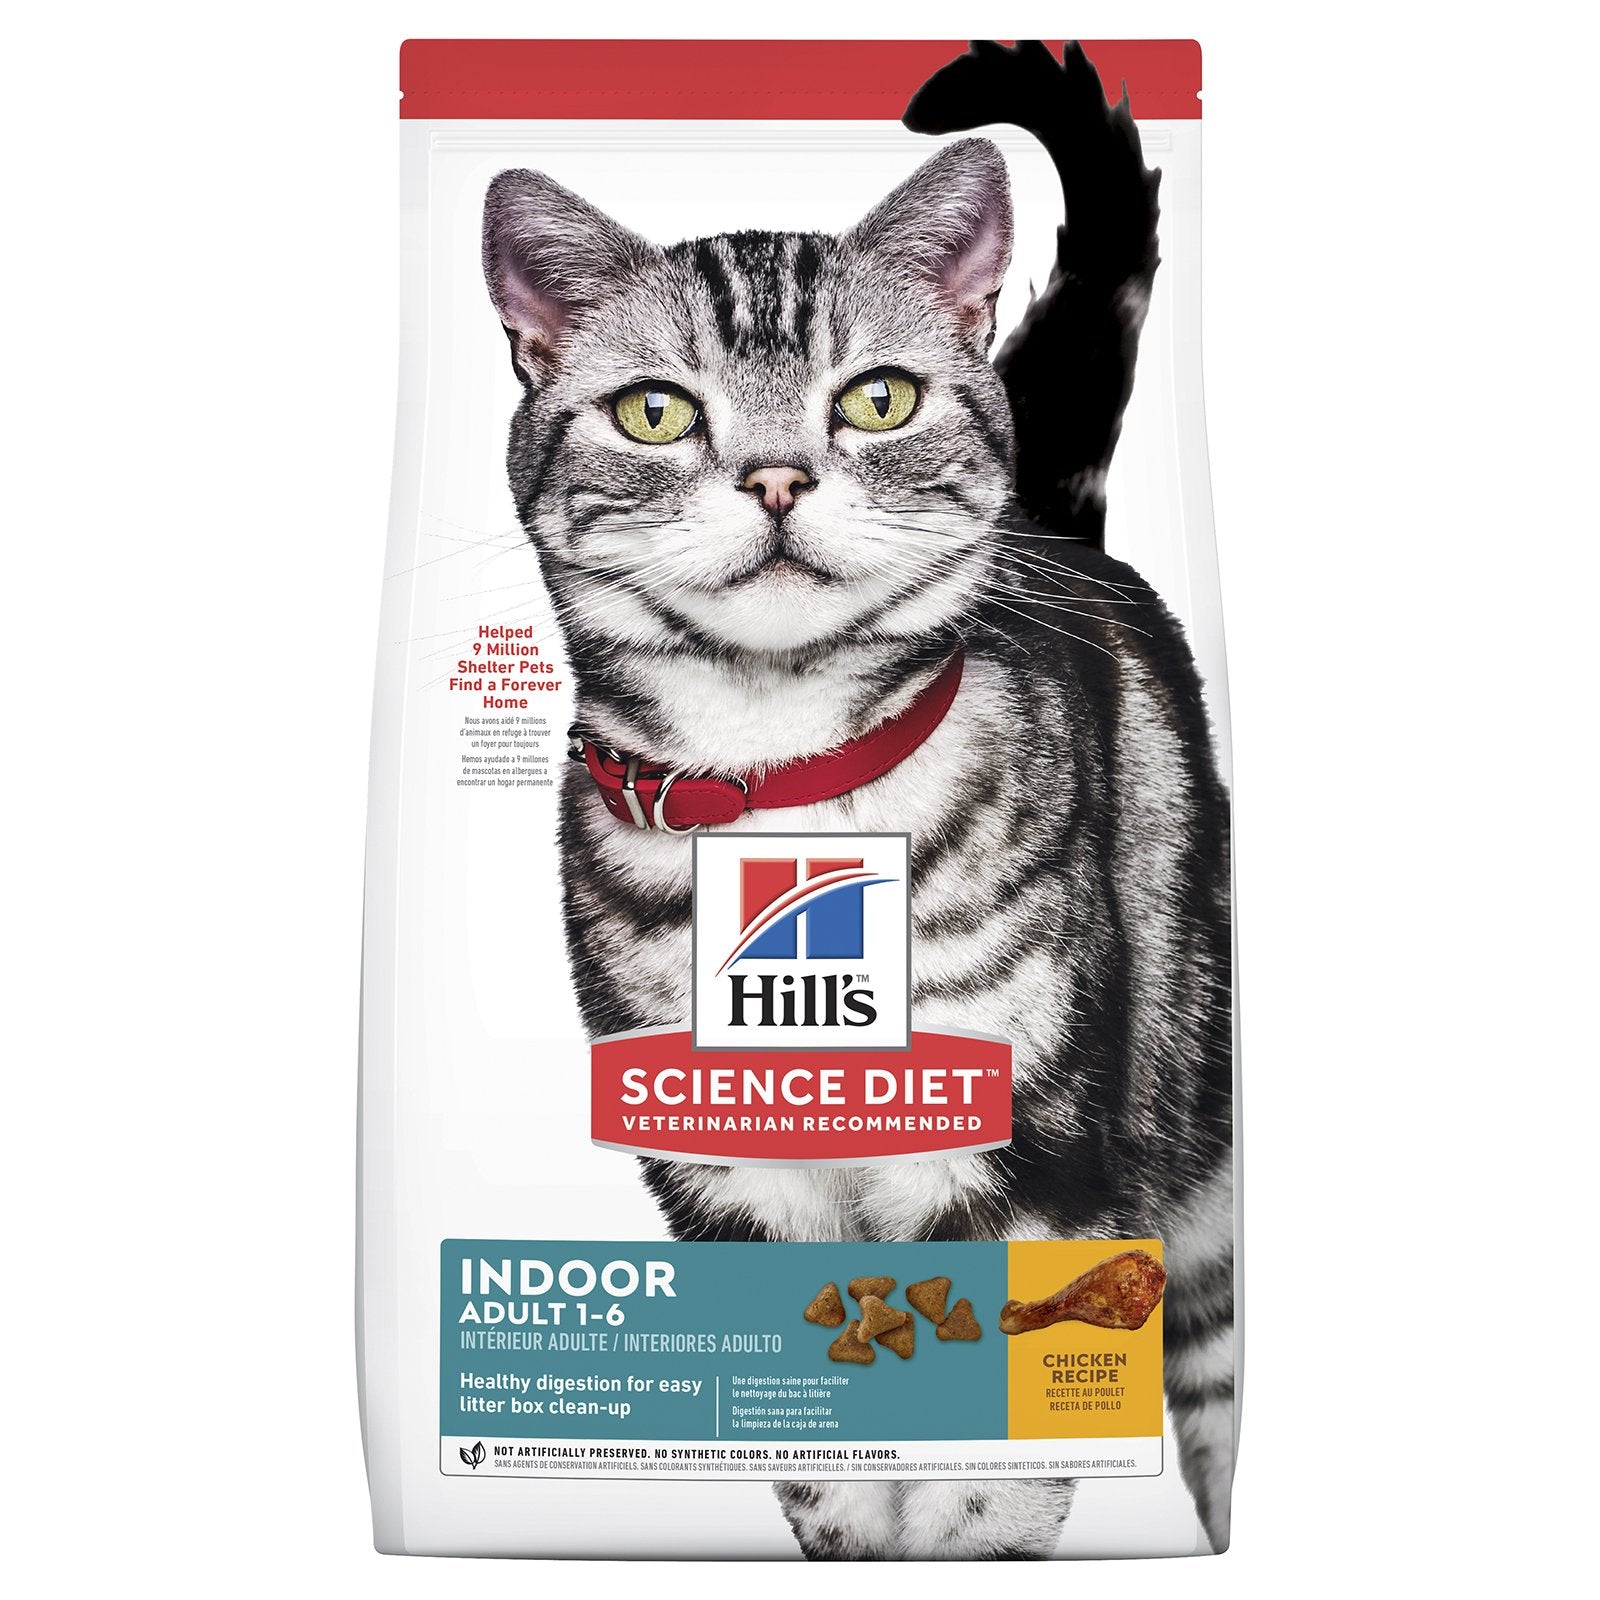 Hill's Science Diet for Cats